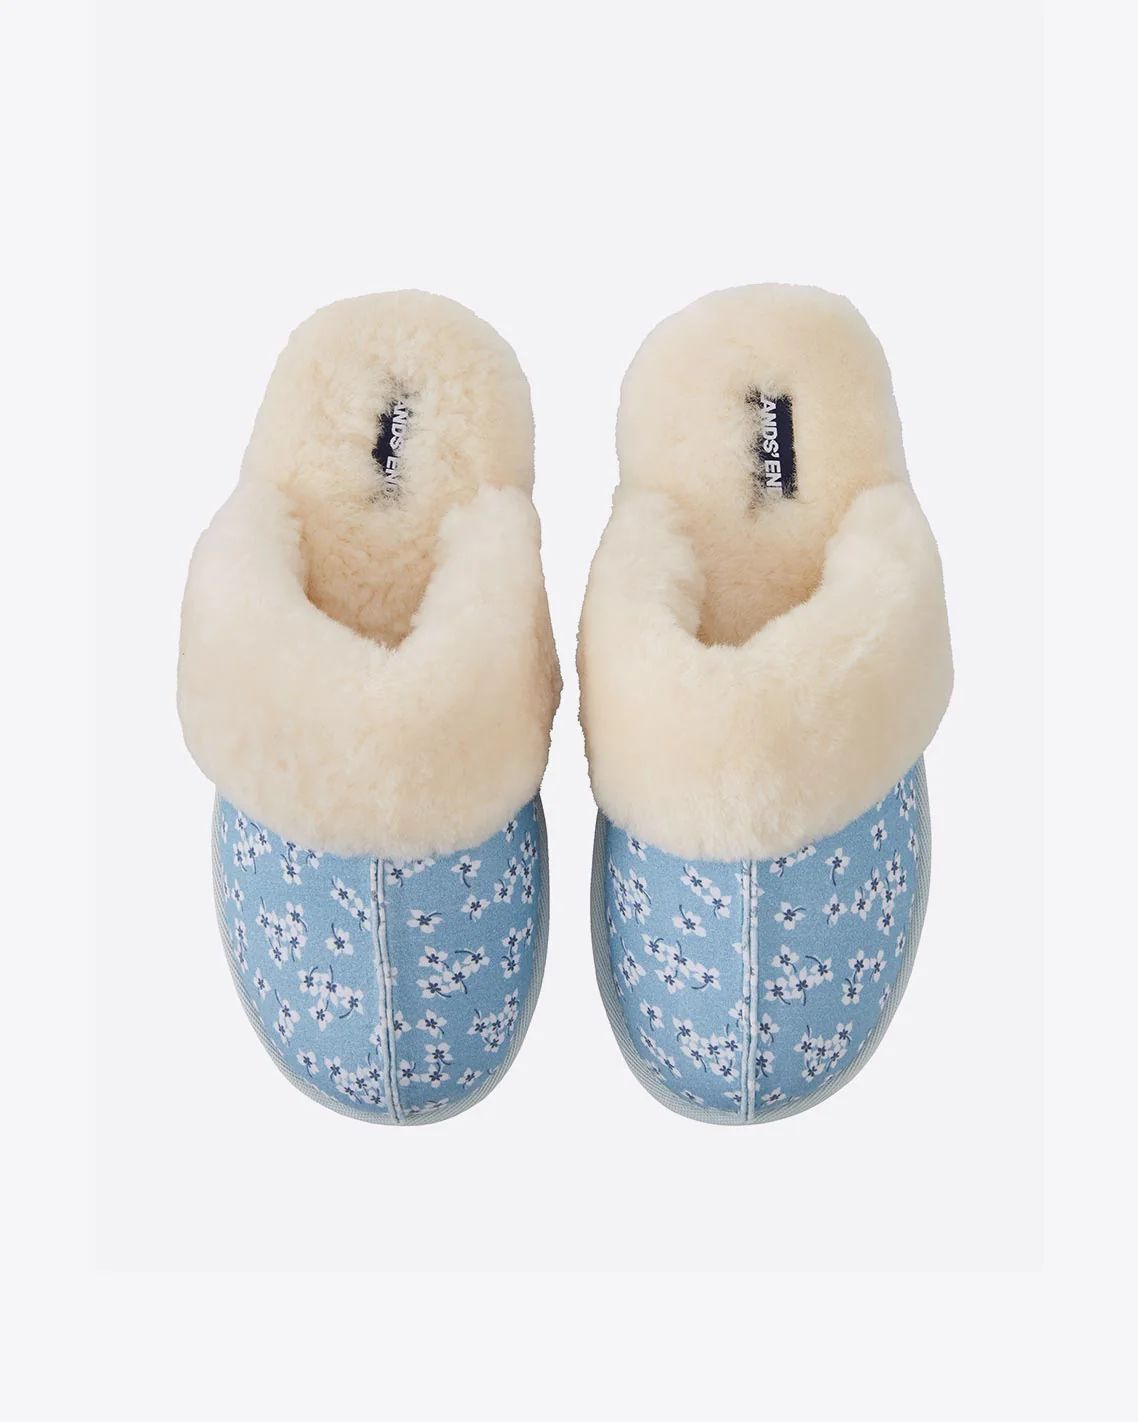 Shearling Clog Slippers in Floral Chambray | Draper James (US)